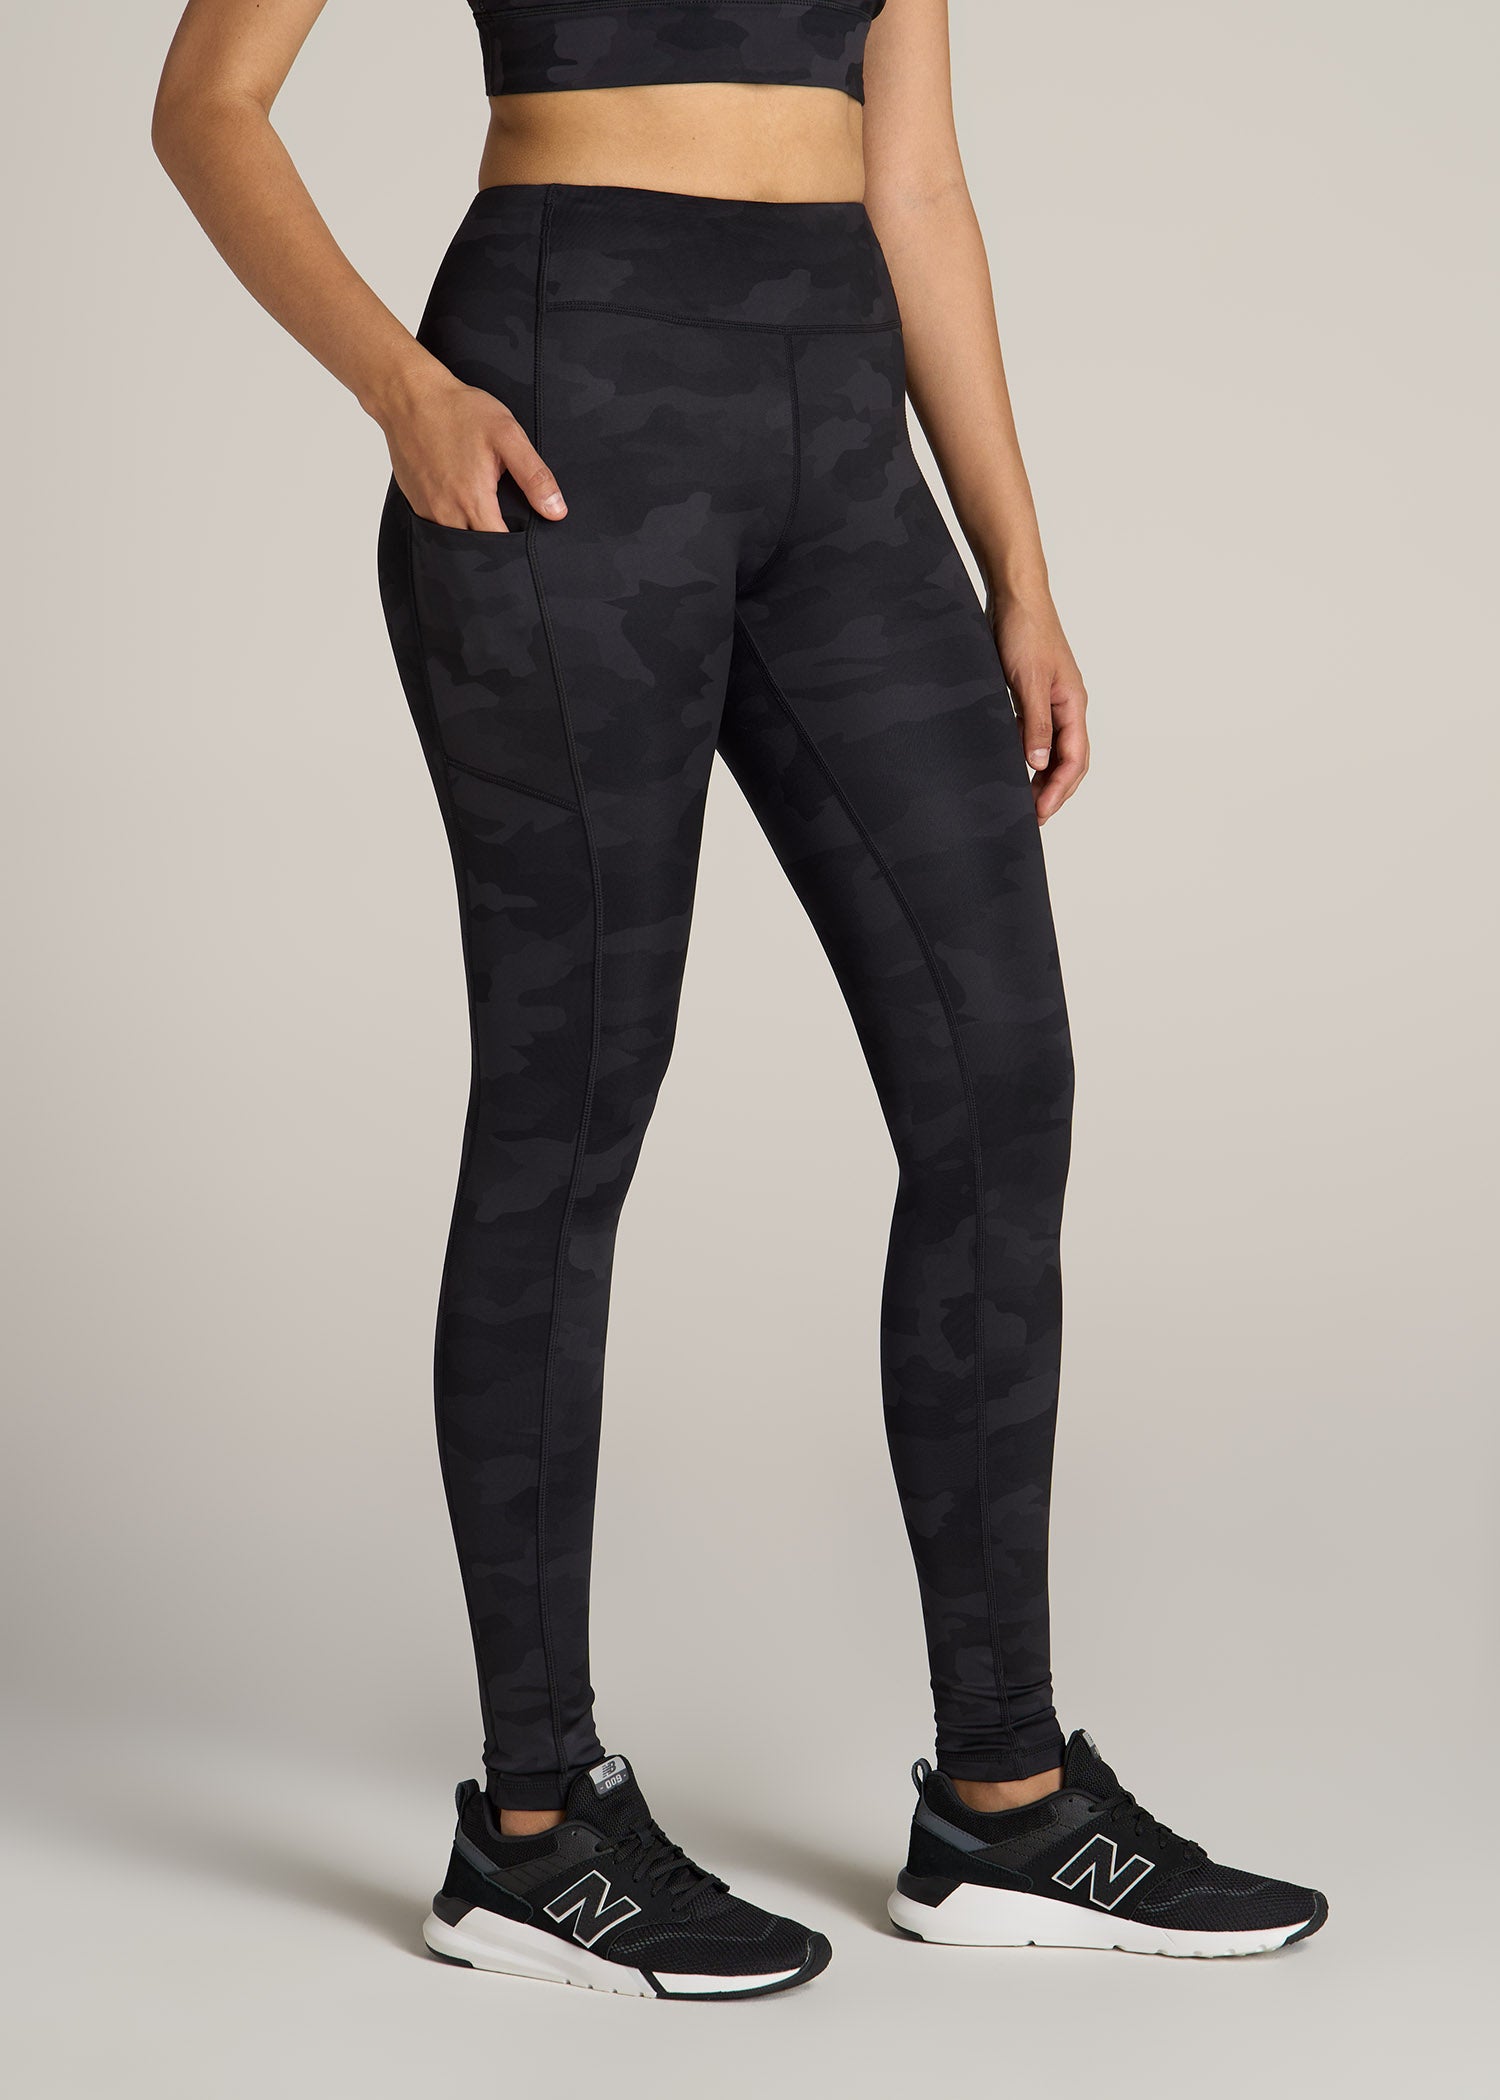 Women's Active Tall Leggings with Pockets in Grey Camo